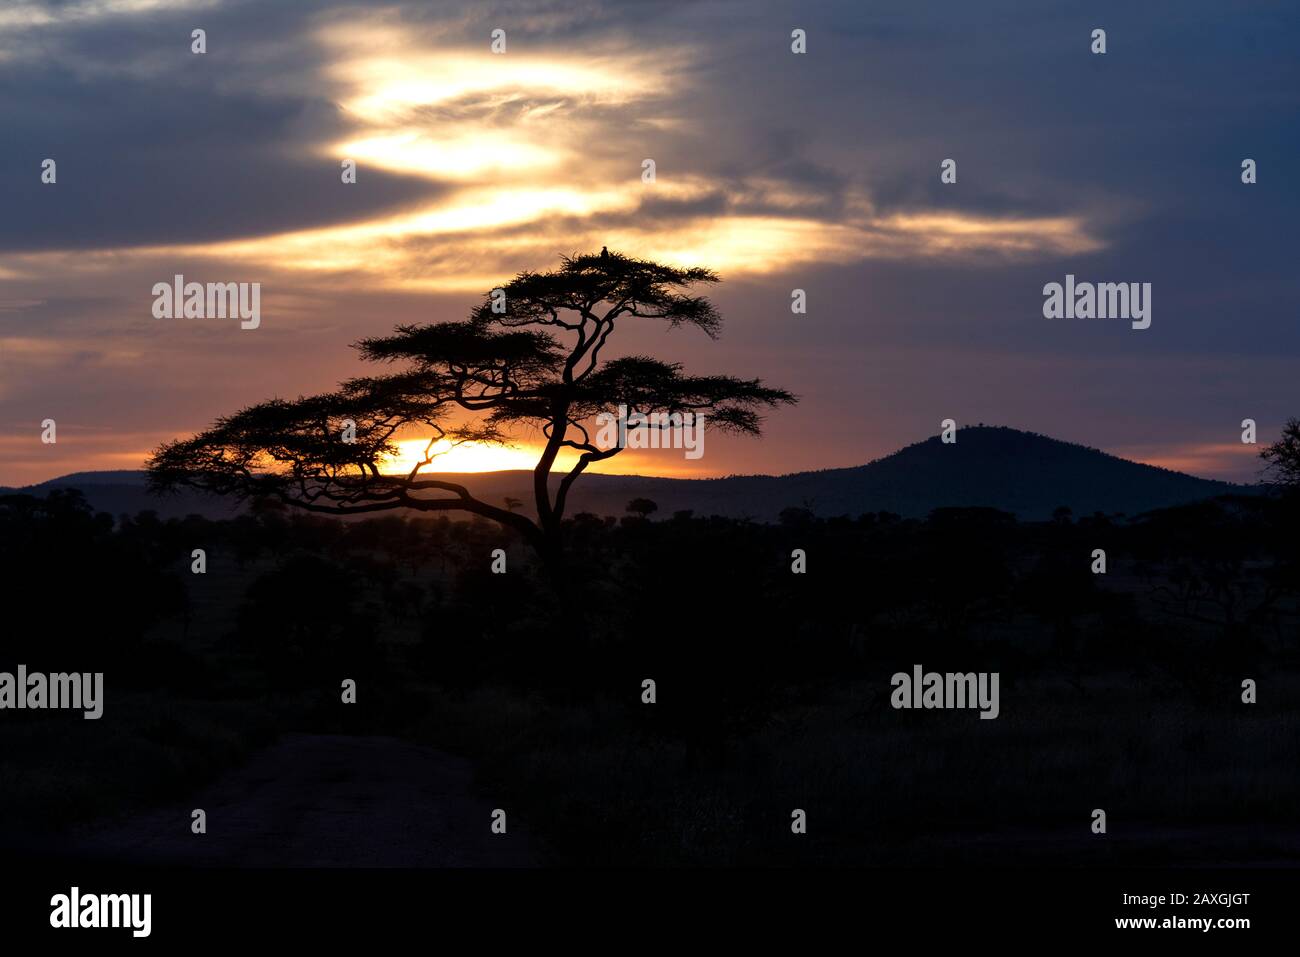 Acacia silhouetted by sunset in the Serengeti National Park, Africa. Stock Photo